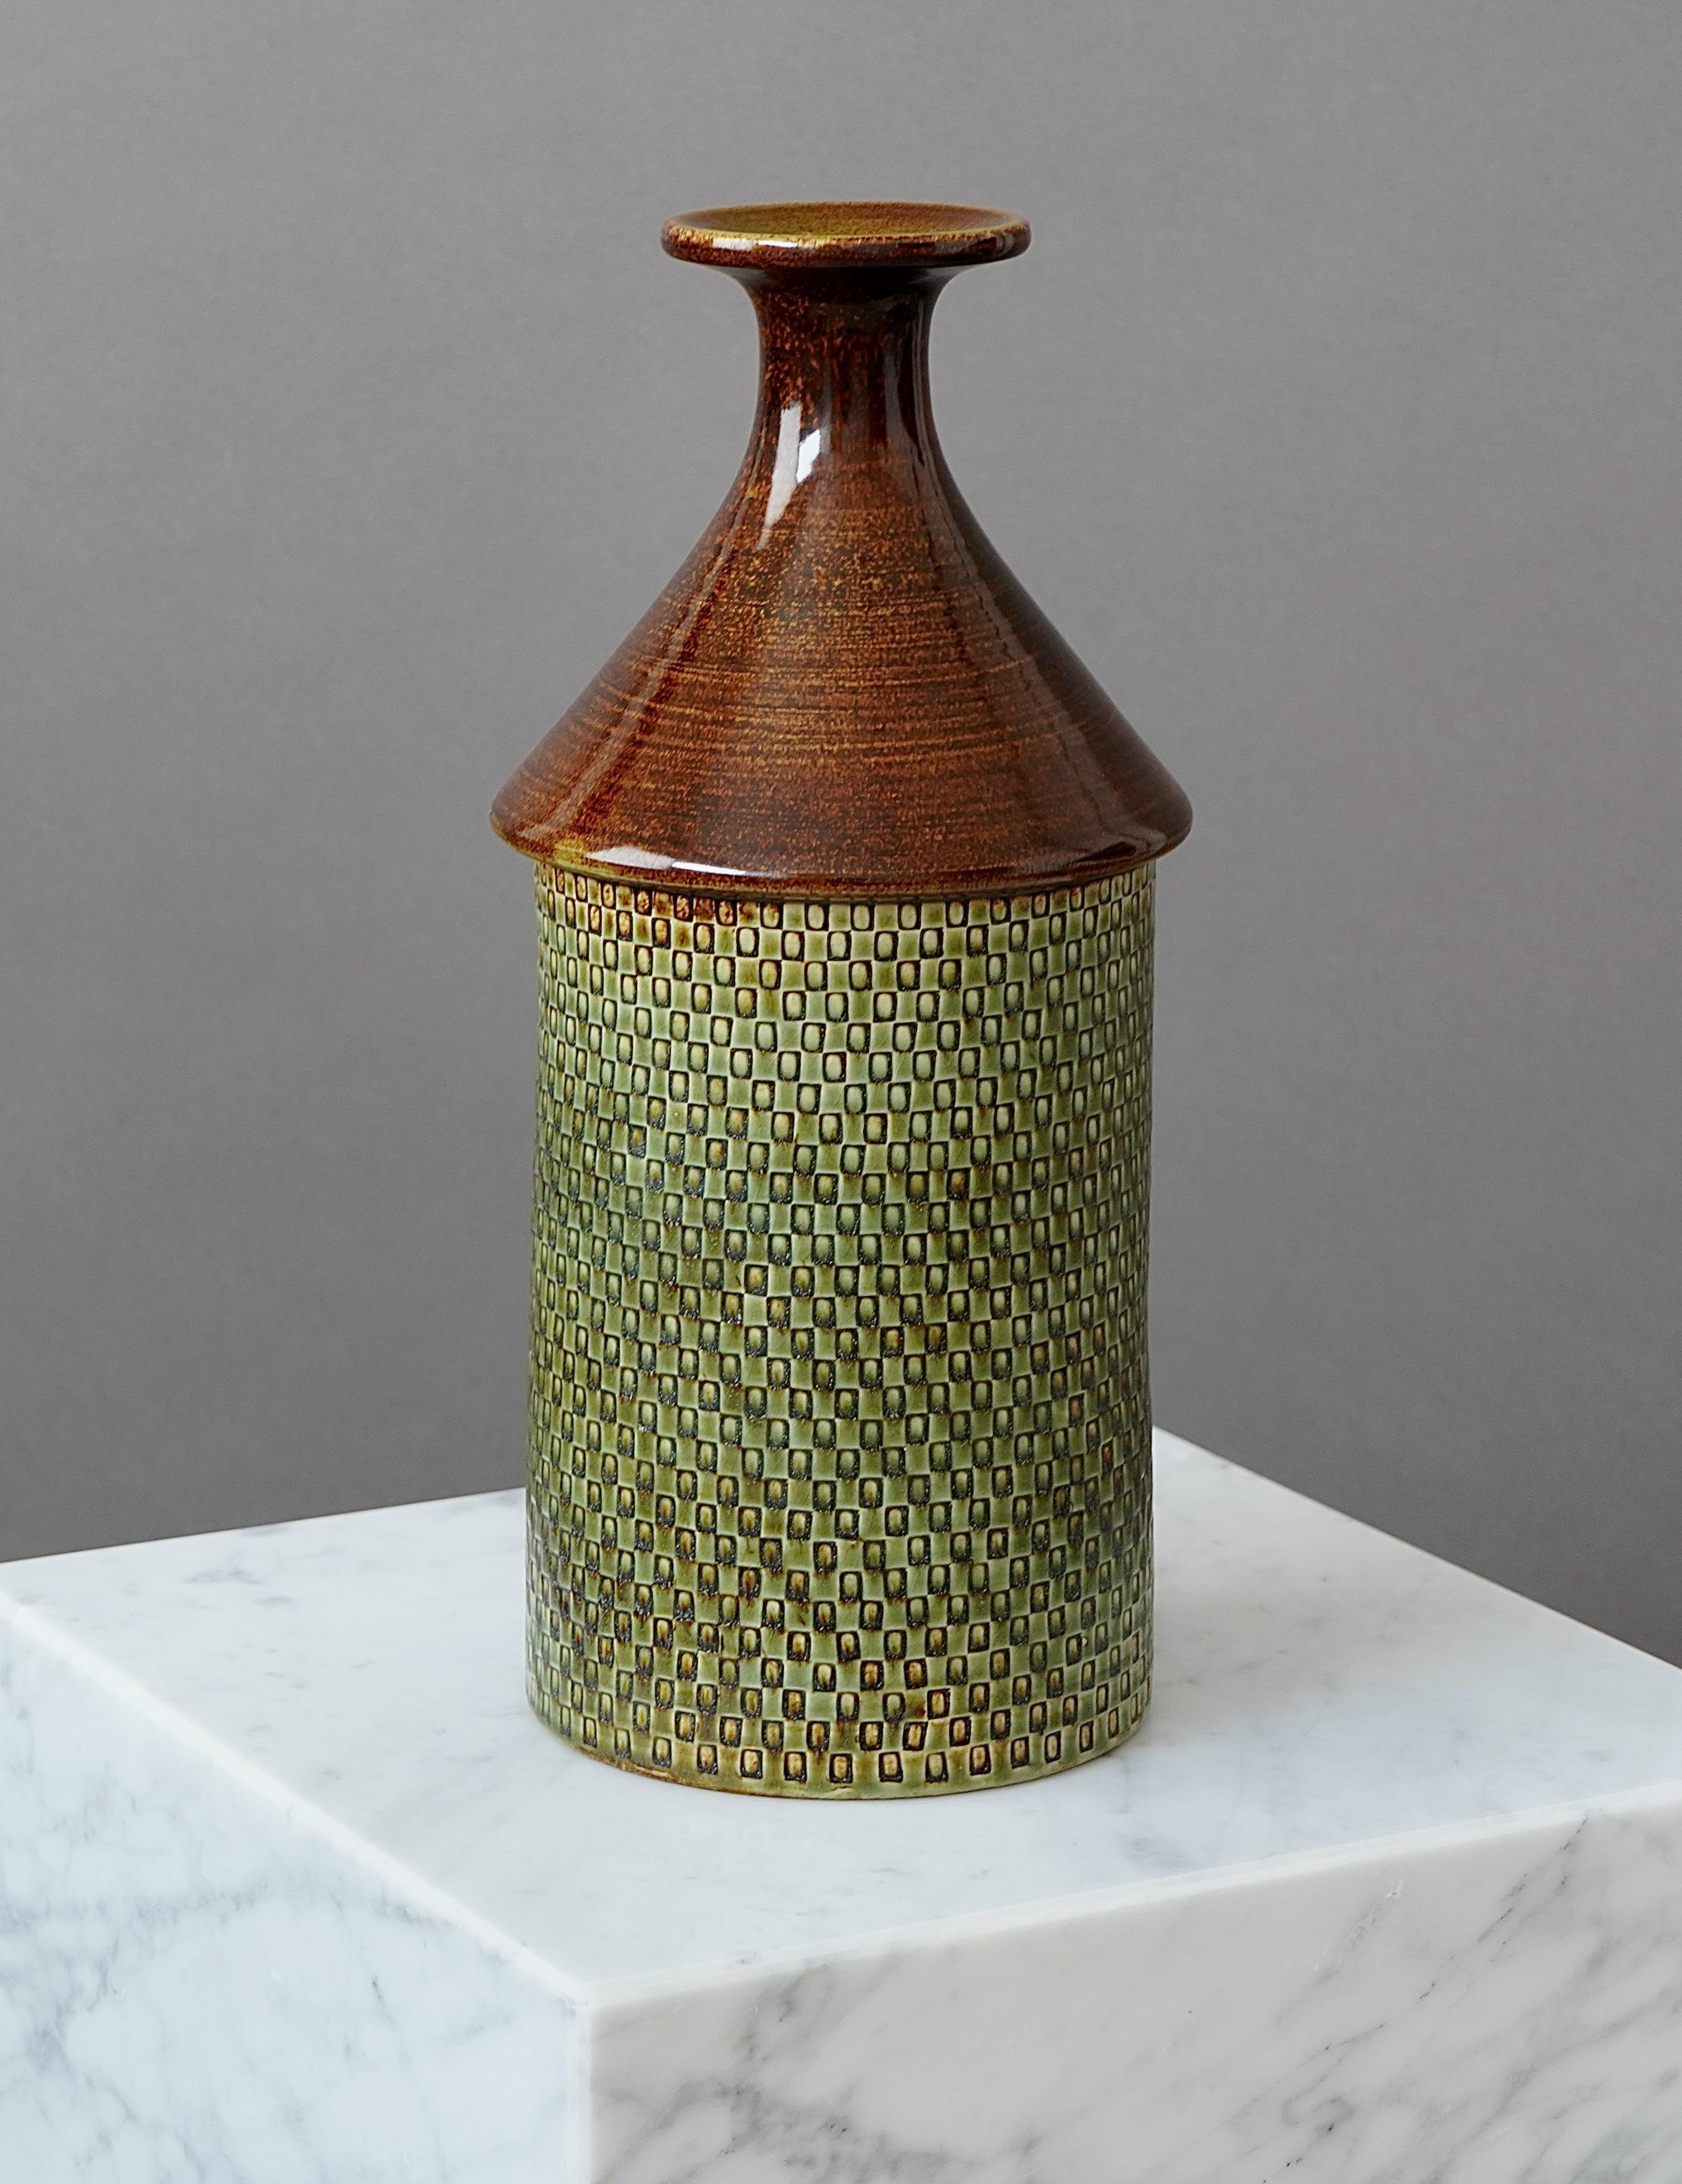 A beautiful and unique stoneware vase with amazing glaze.
Made by Stig Lindberg in Gustavsberg Studio, Sweden. 1964.

Excellent condition.
Incised 